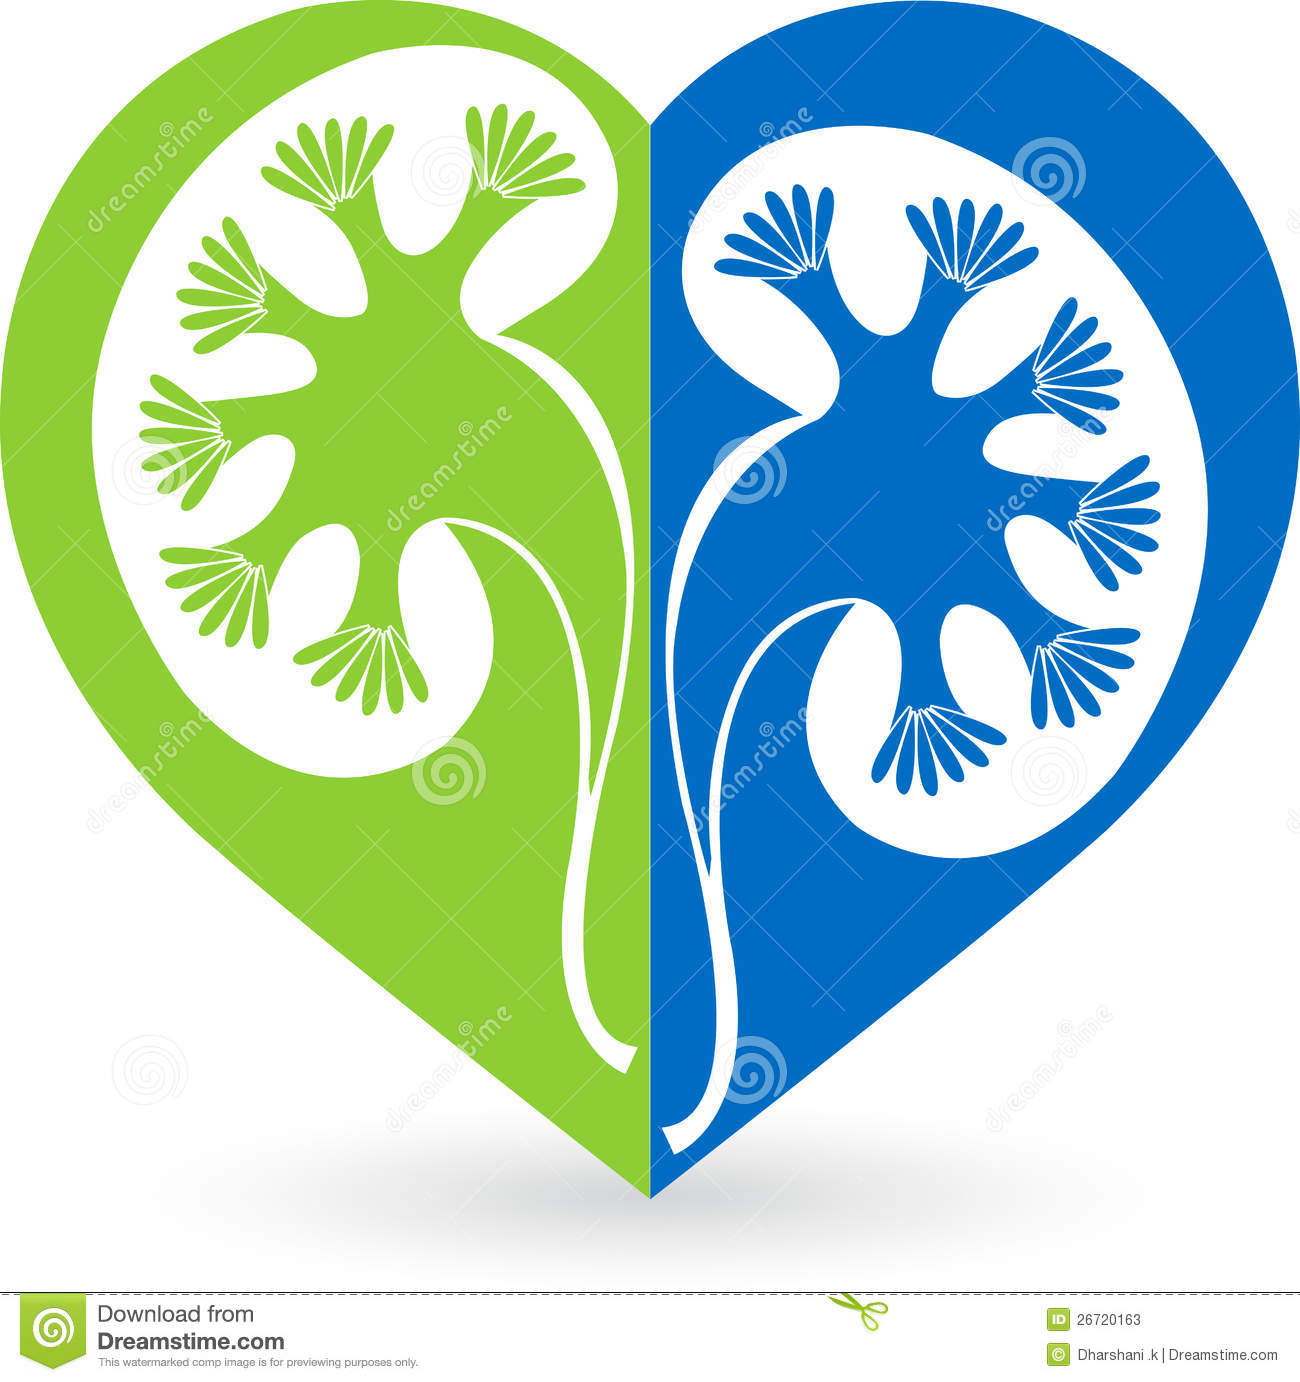 Illustration Art Of A Love Shape Kidney Logo With Isolated Background